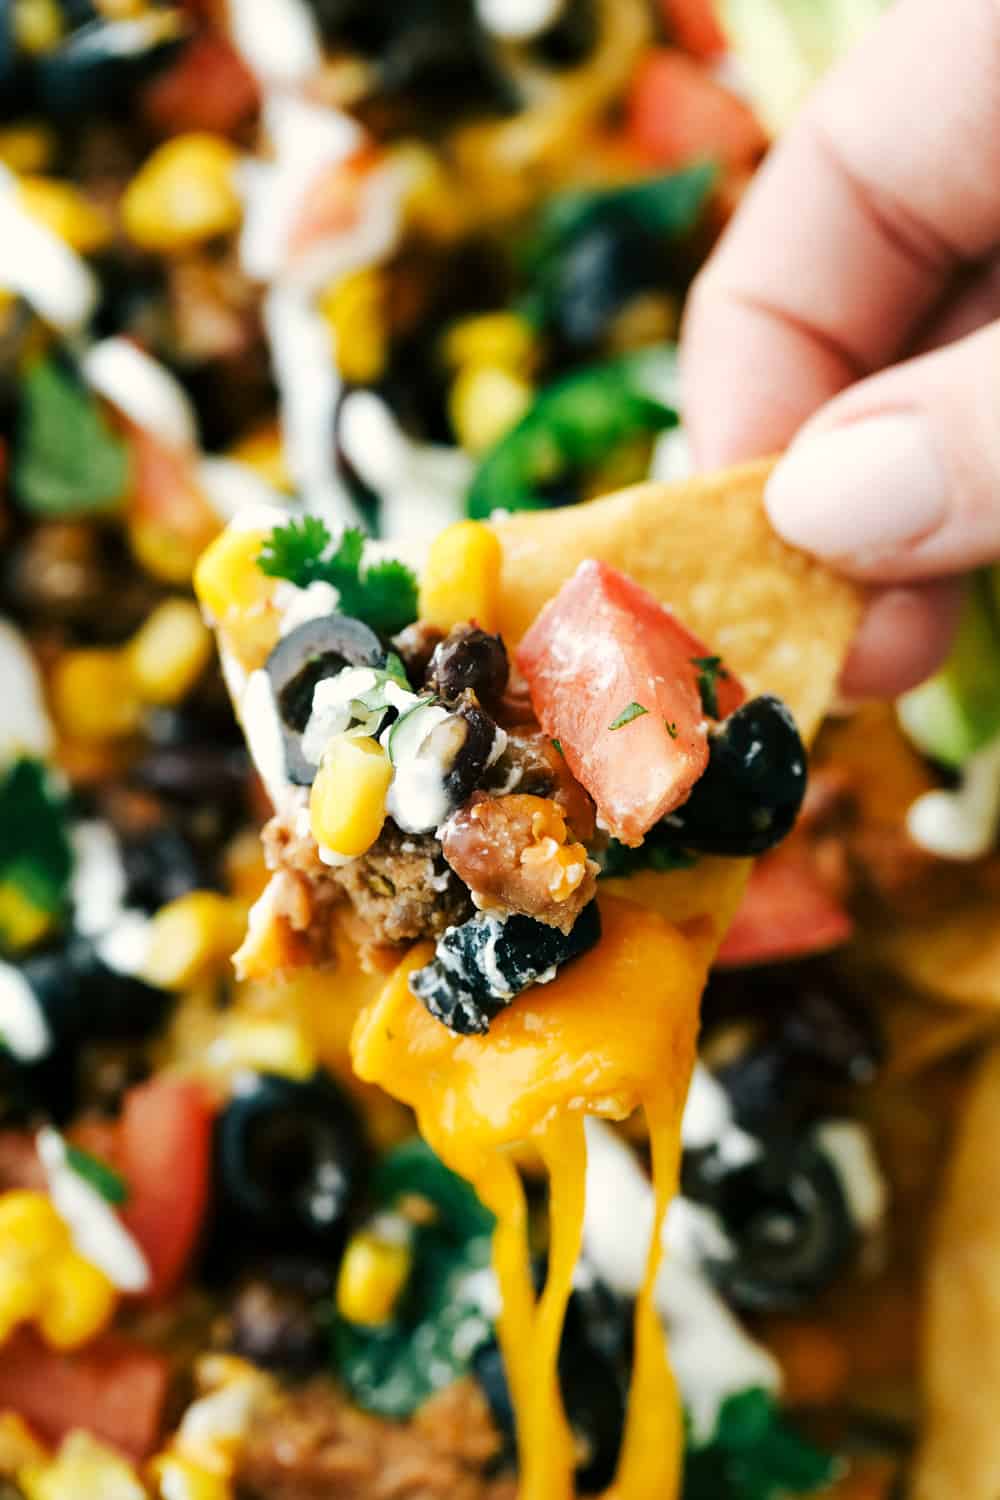 Unclose photo of a nacho chip with all the toppings on one of them. 